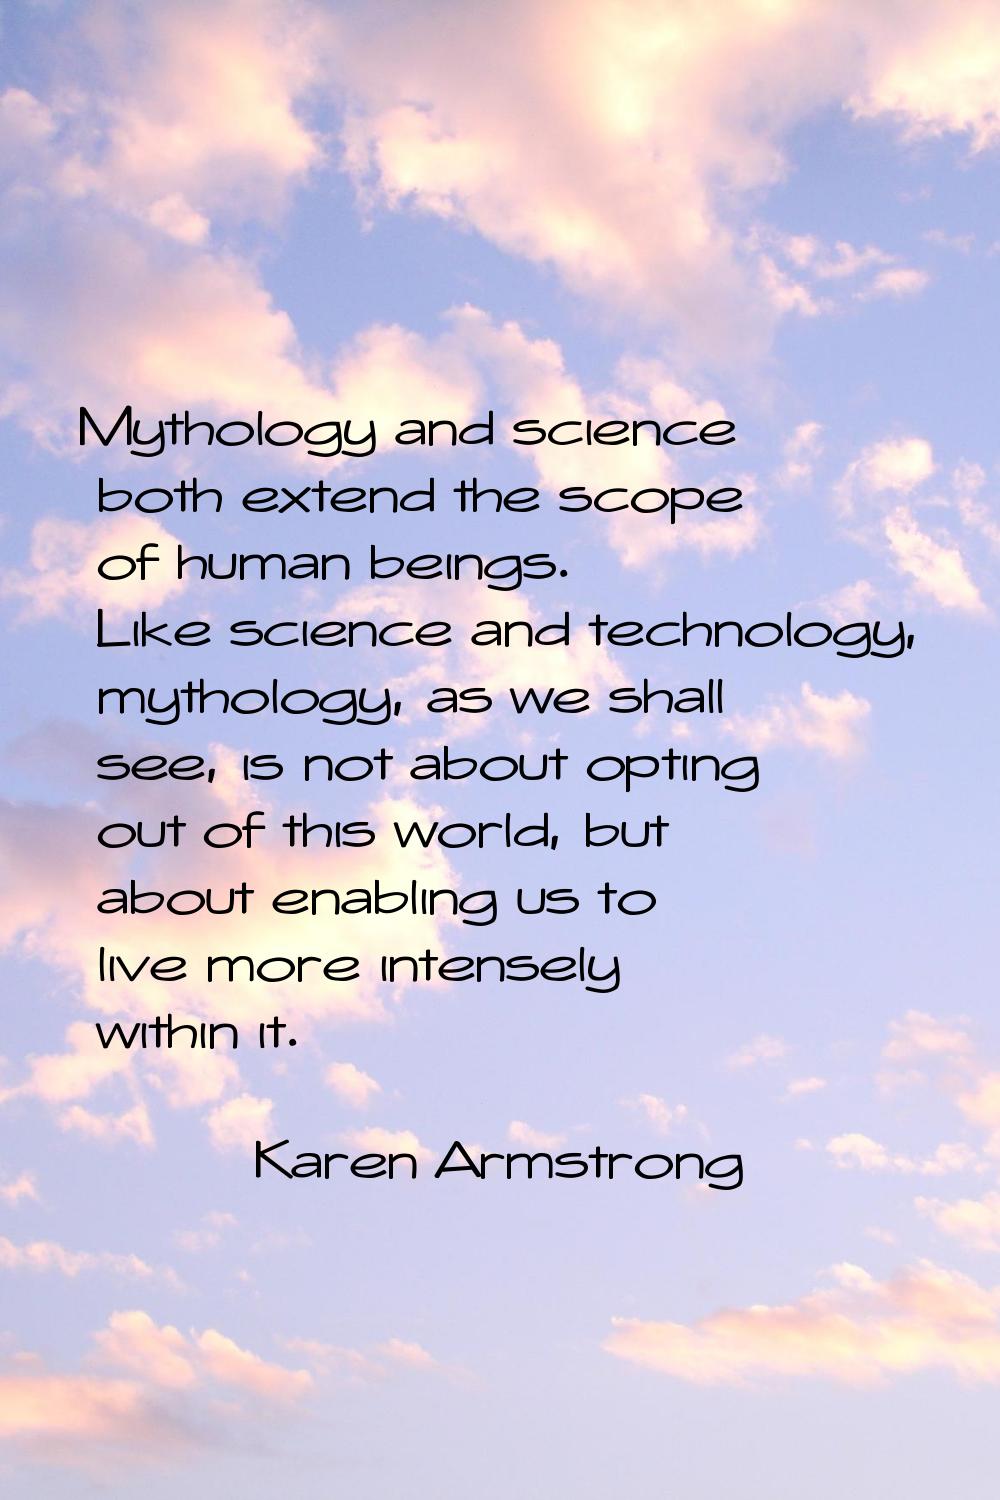 Mythology and science both extend the scope of human beings. Like science and technology, mythology